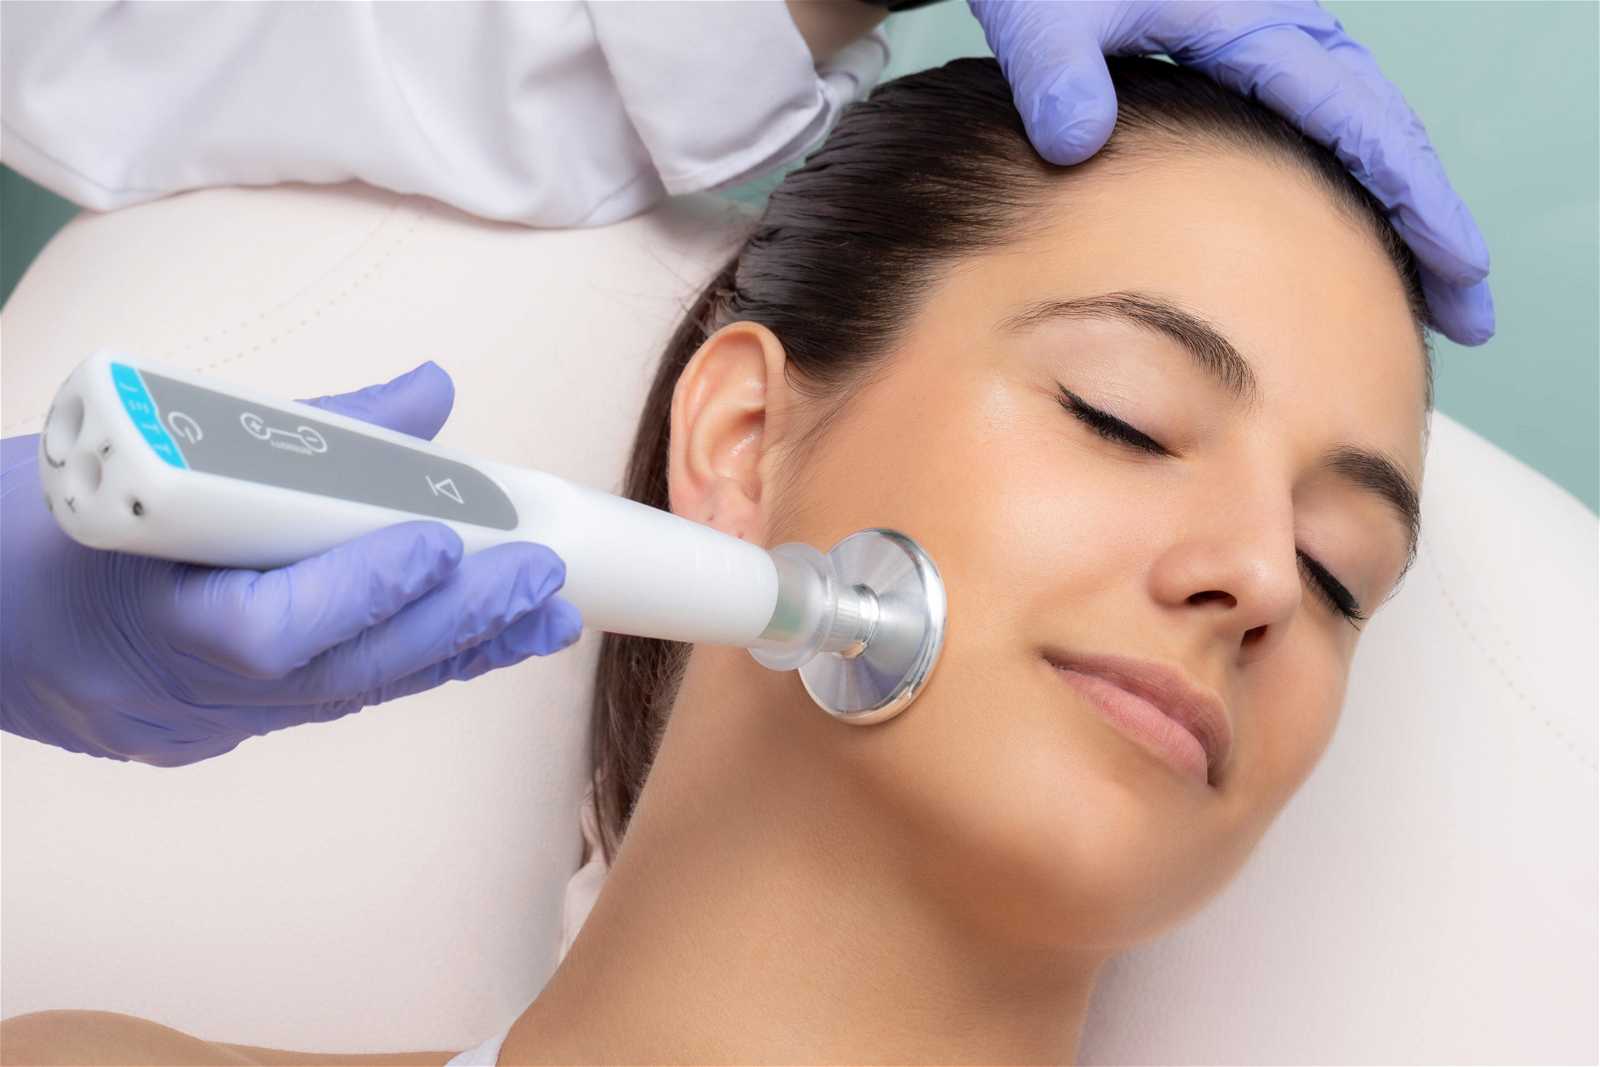 Laser Skin Tightening and Its Areas of Treatment - Premier Medspa